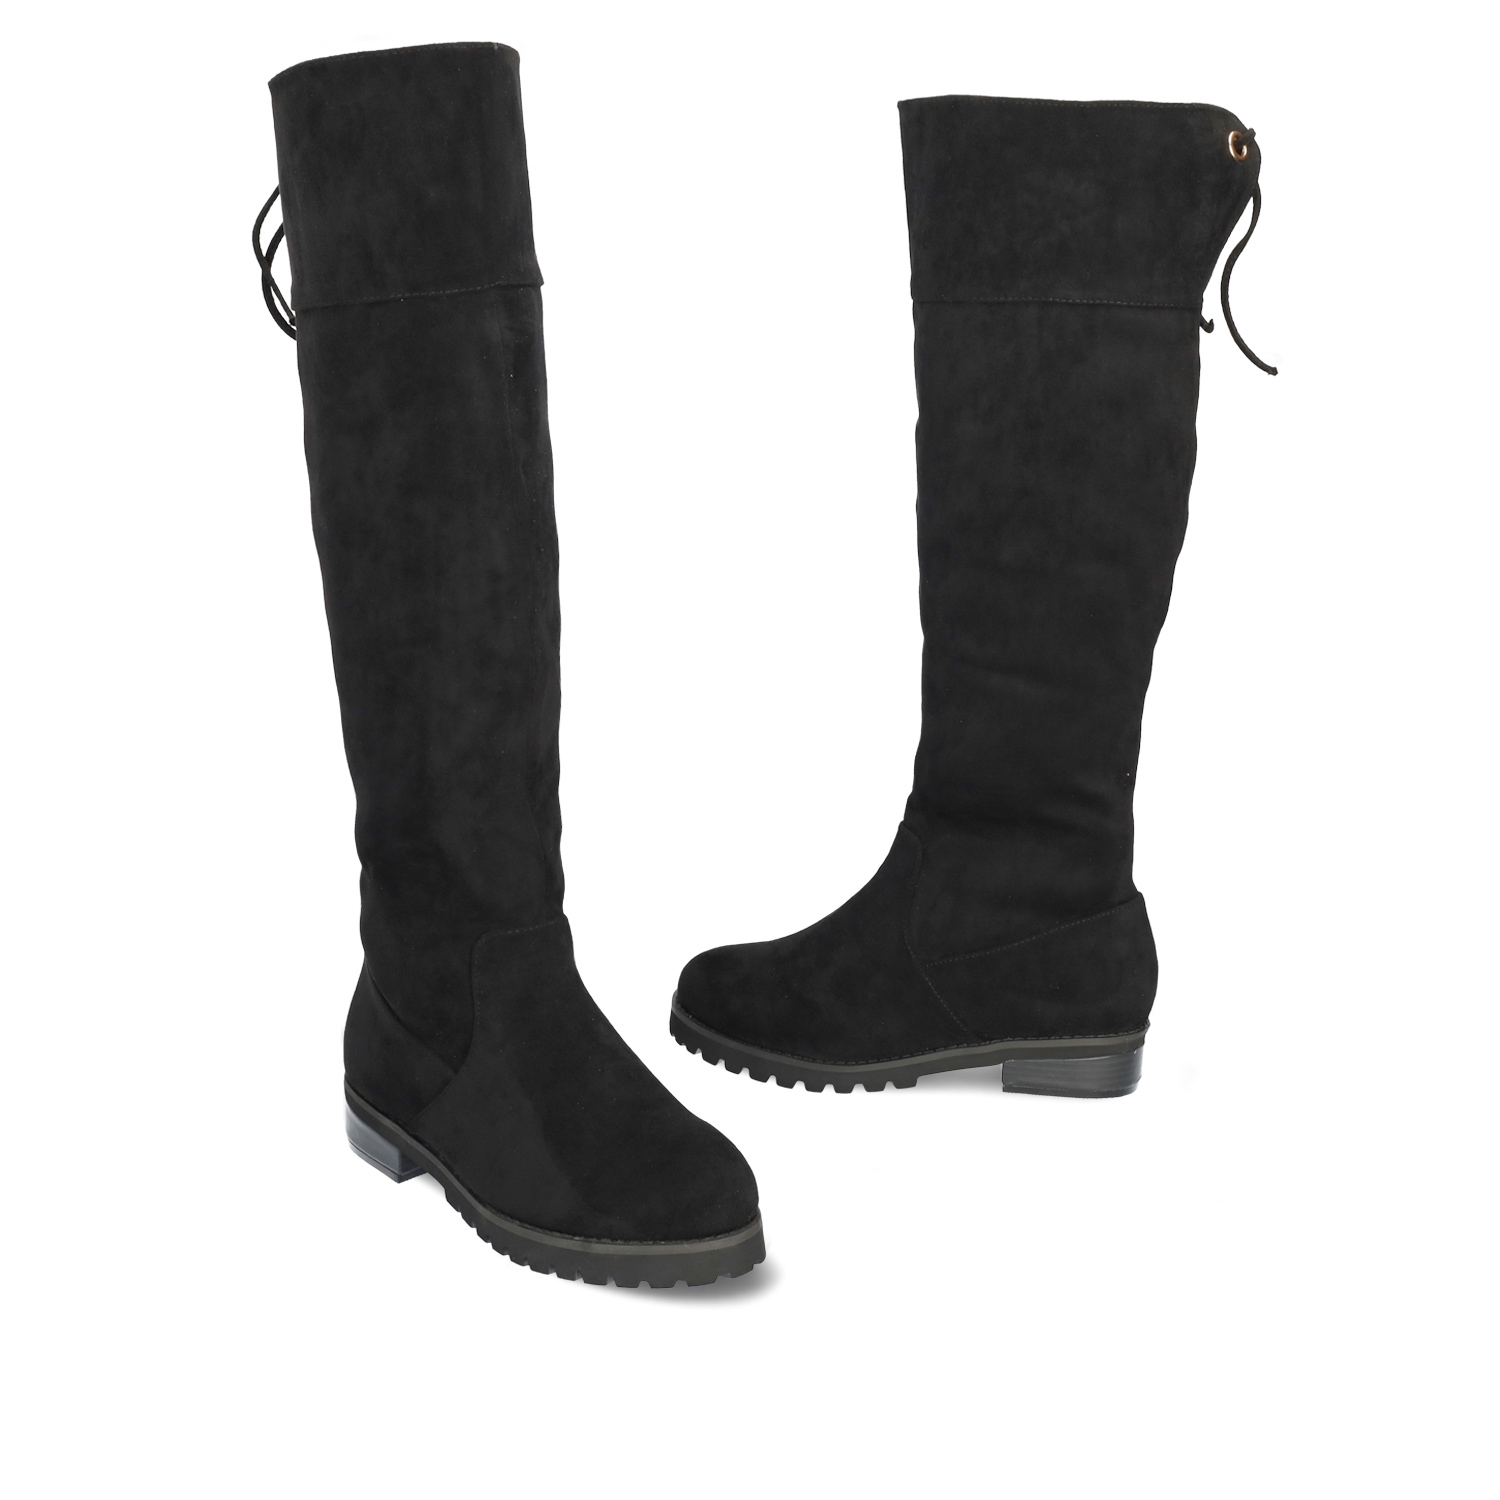 Knee-high boots in black faux suede 